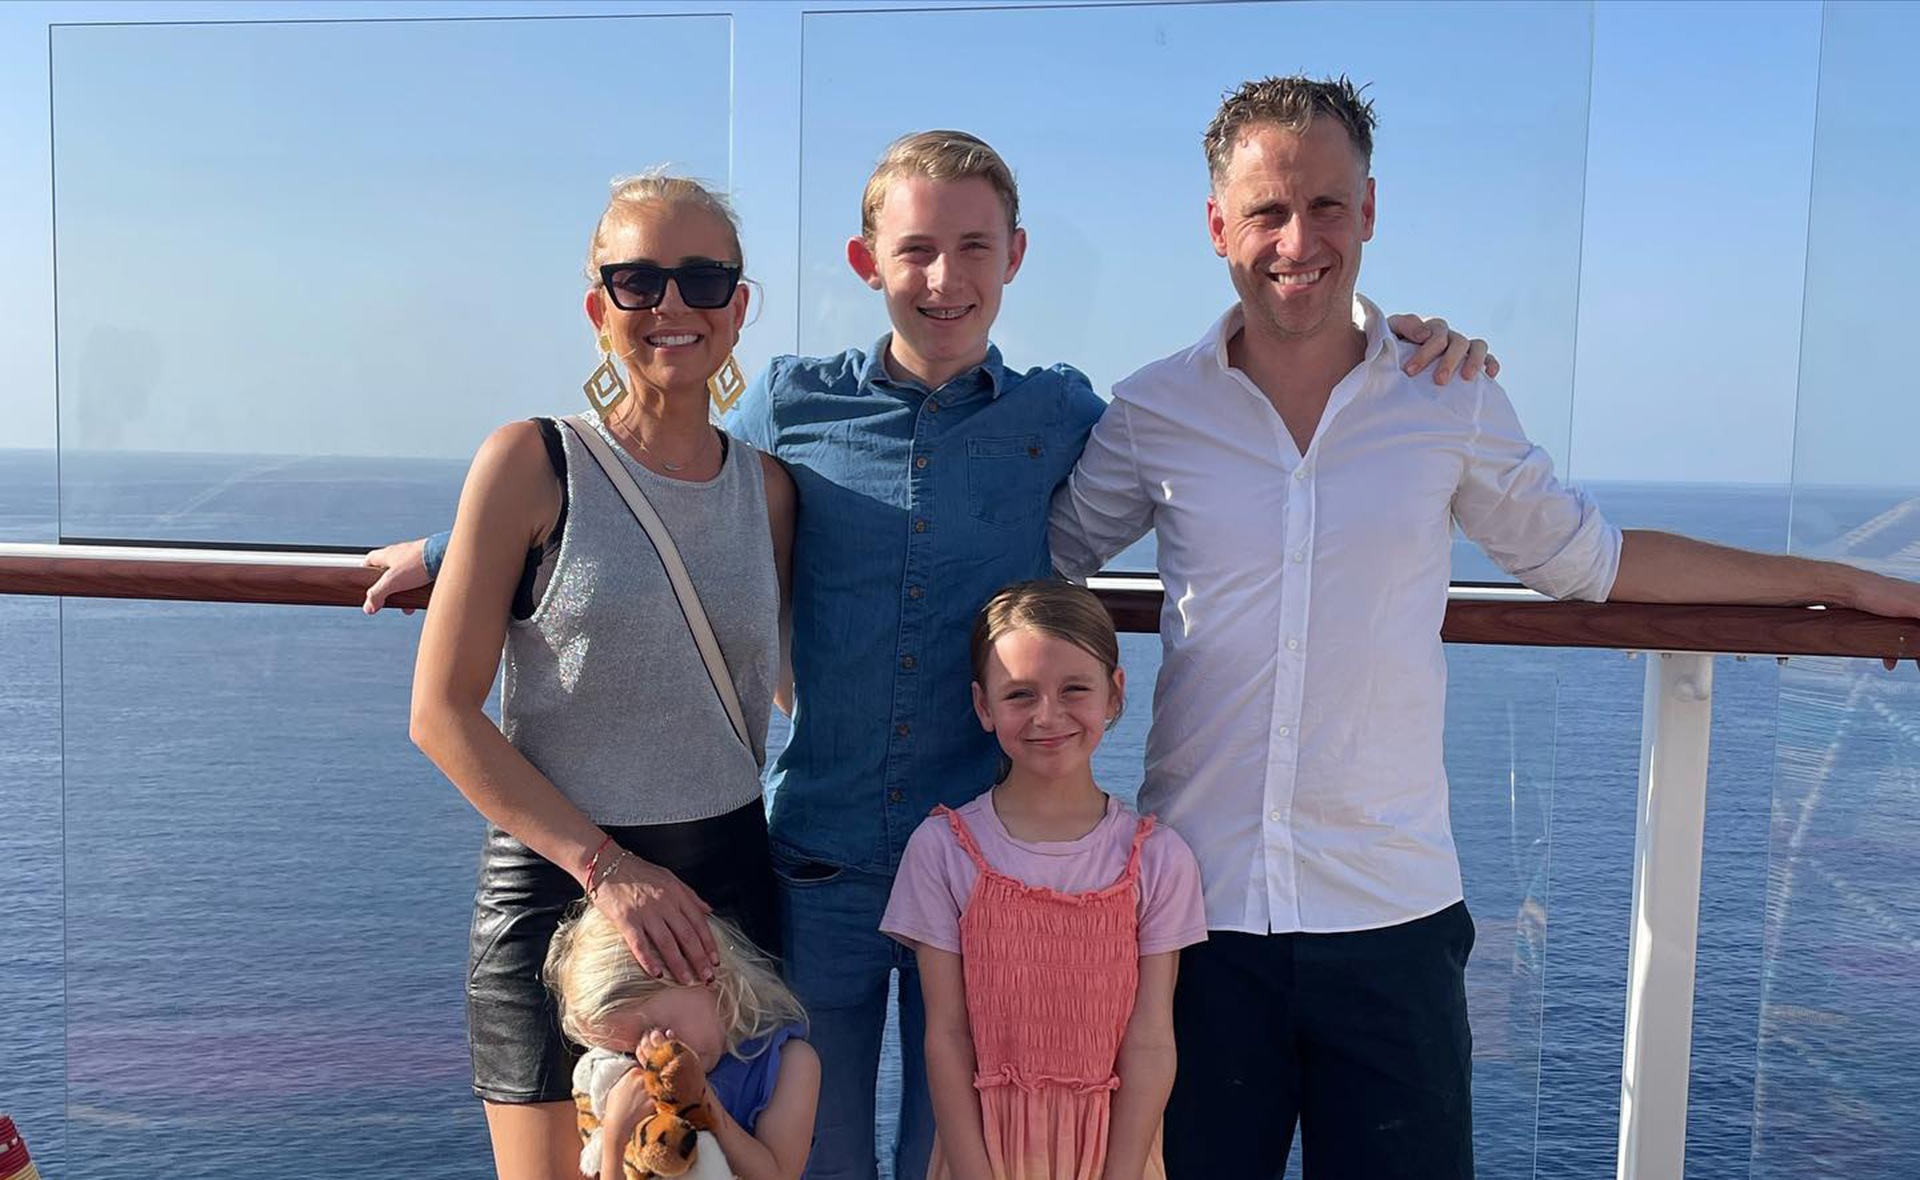 Carrie Bickmore reveals why living overseas with her kids was “really, really hard”